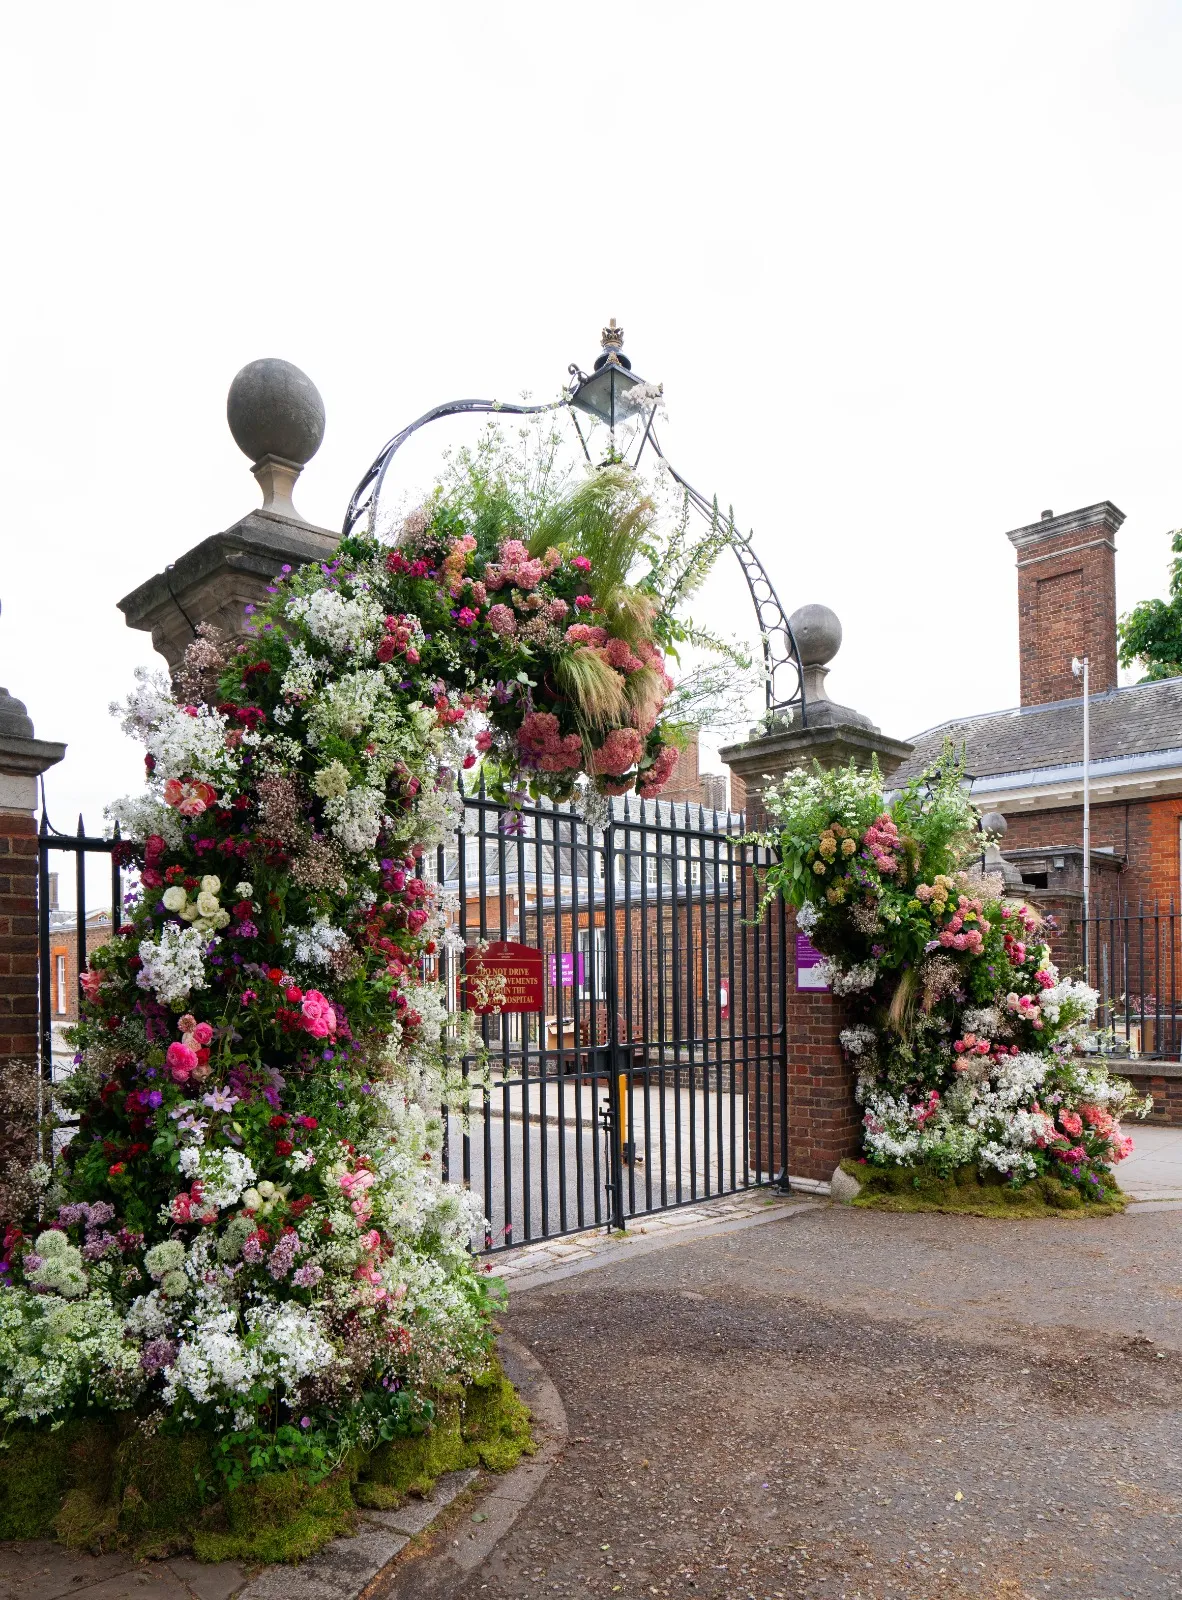 Lucy Vail's floral display at the Chelsea entrance